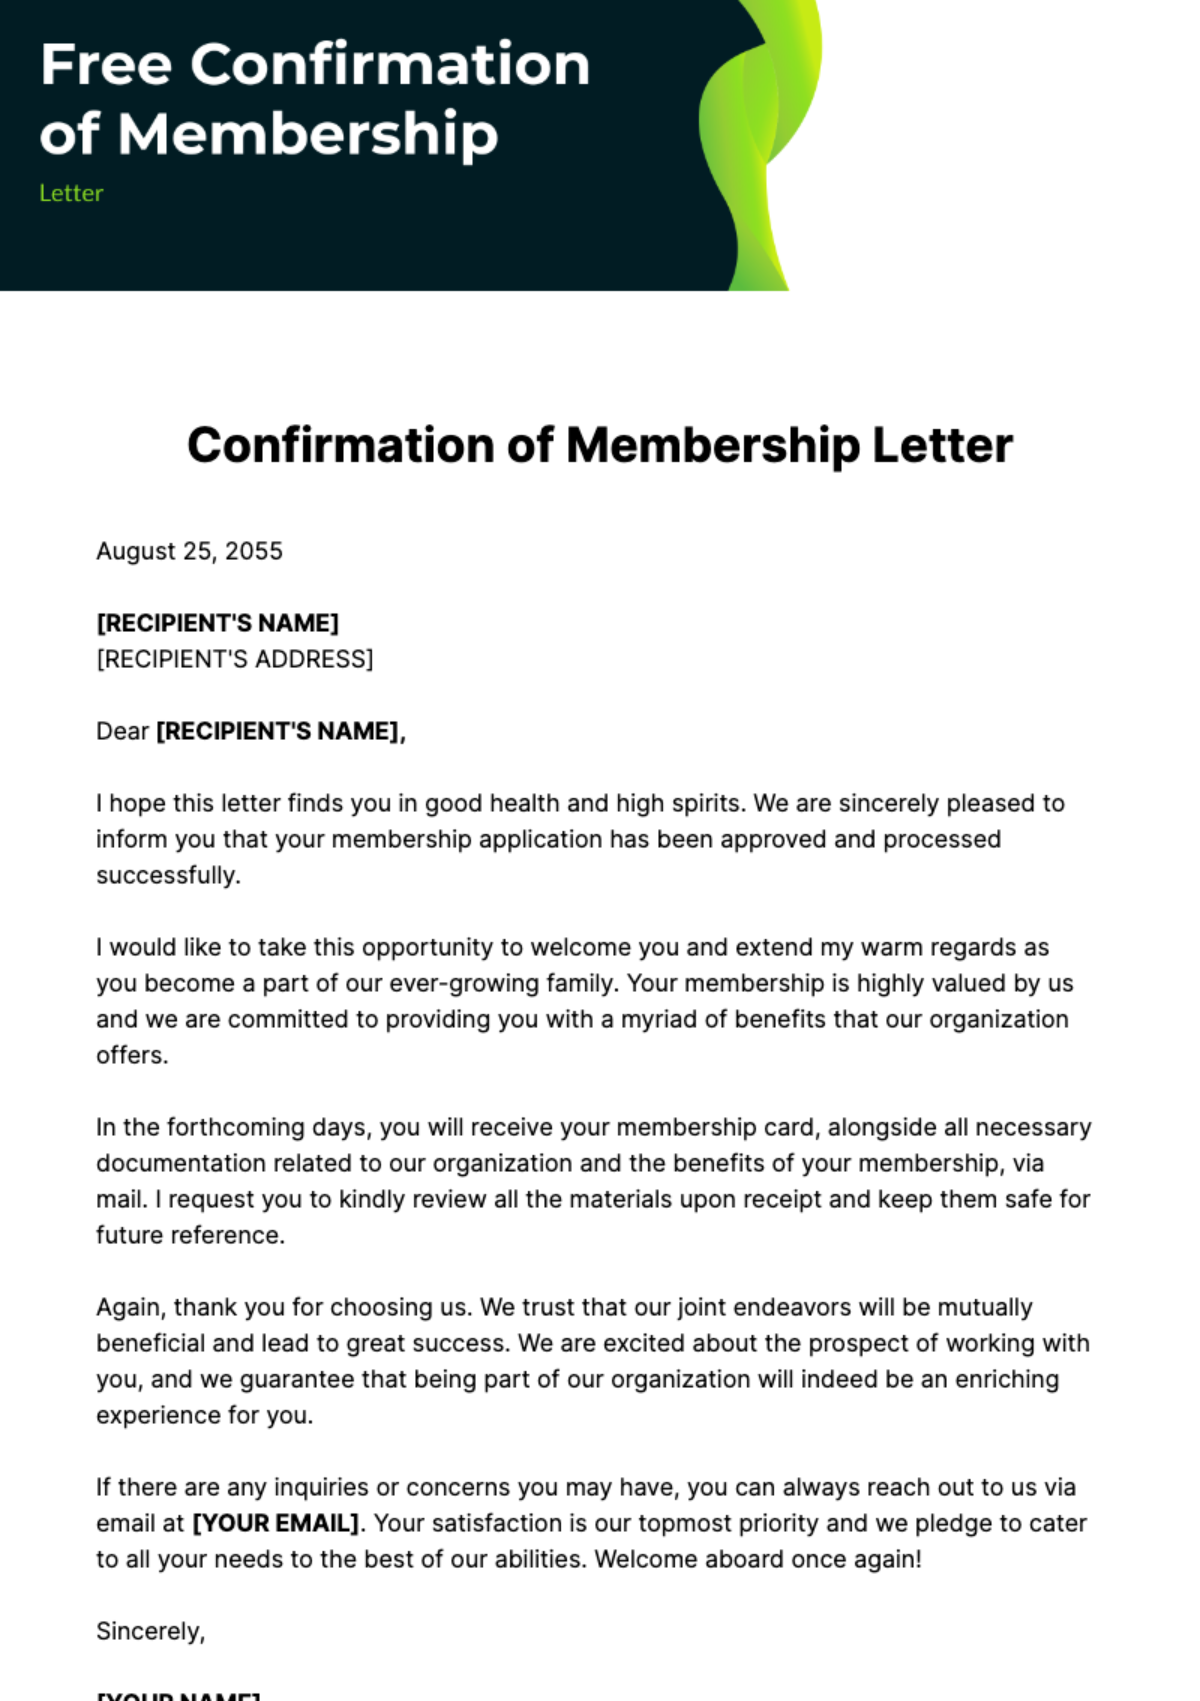 Free Confirmation of Membership Letter Template